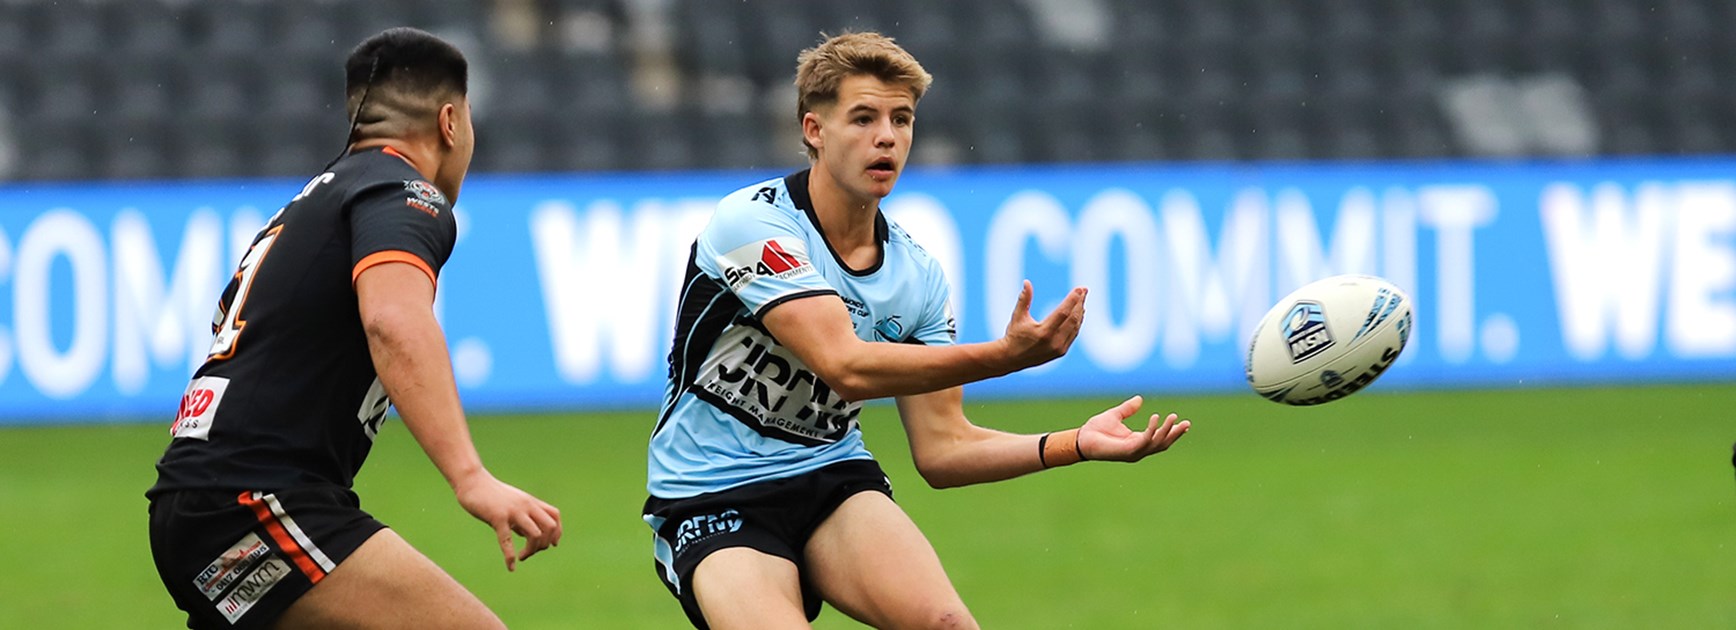 Sharks go down to Magpies in Matts Cup GF